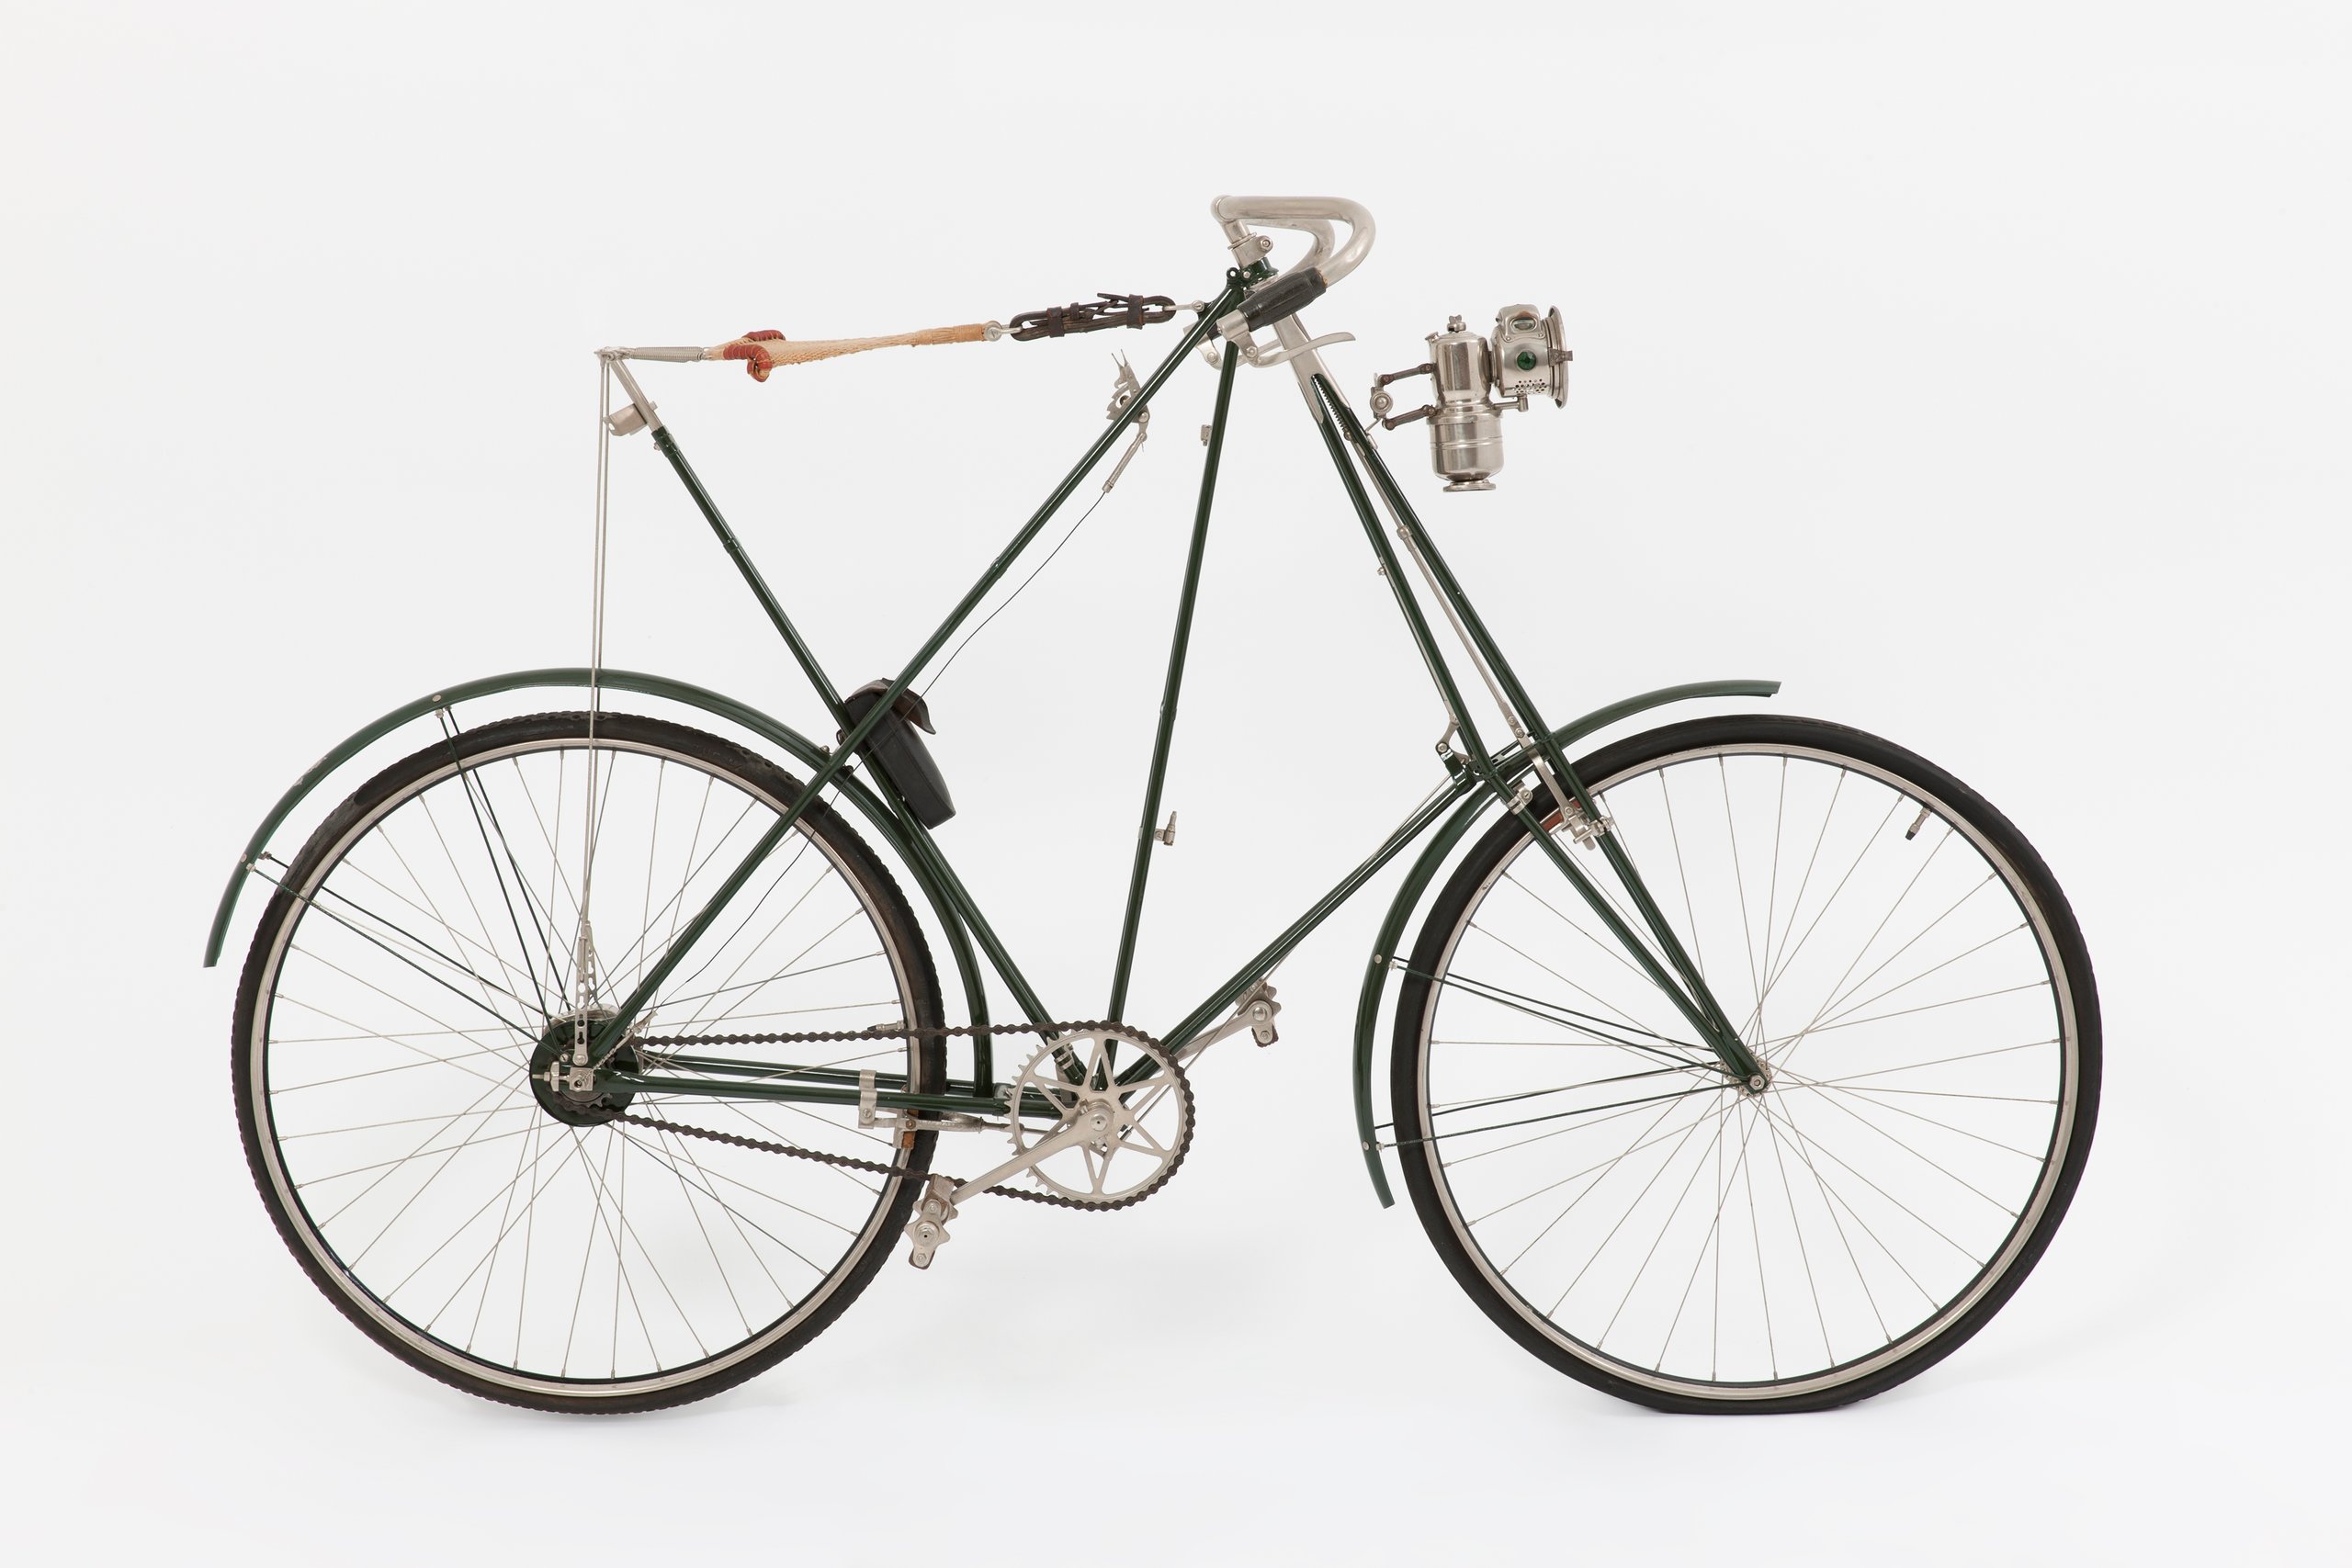  'Dursely Pedersen' safety bicycle by R.A. Lister, Dursley, Gloucestershire